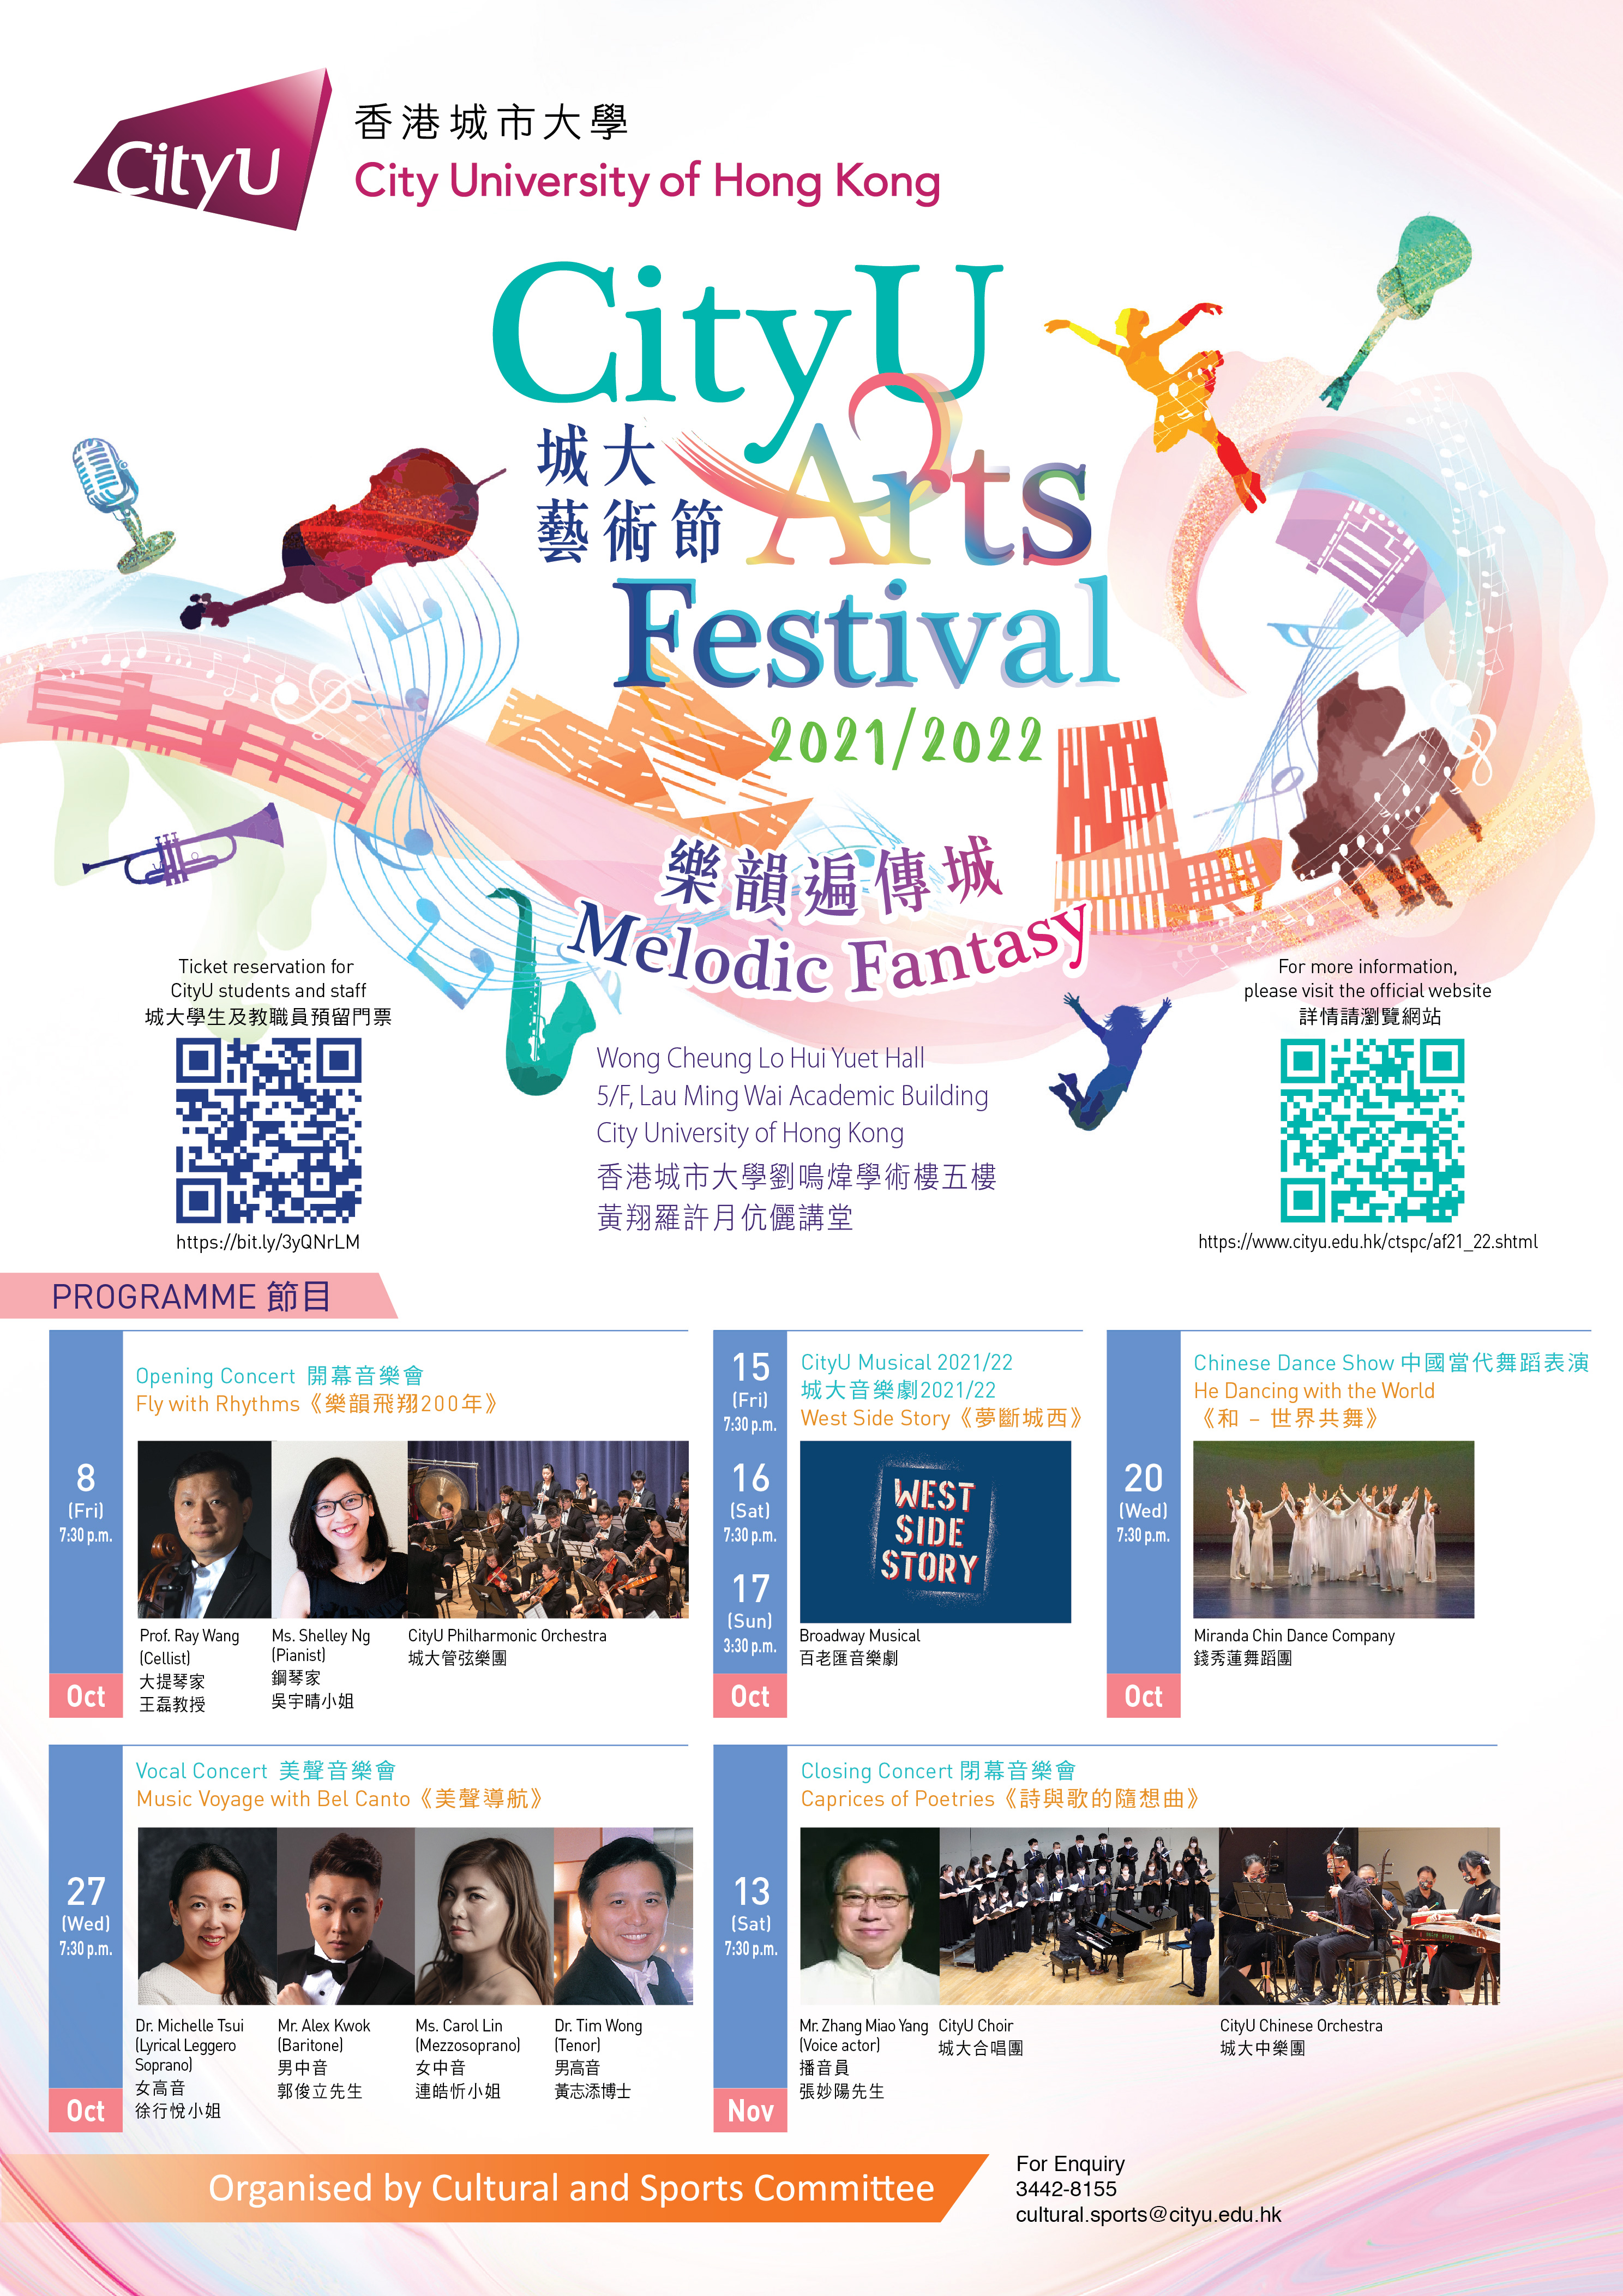 CityU Arts Festival 21/22: Opening Concert: Fly with Rhythms on 8 Oct 2021